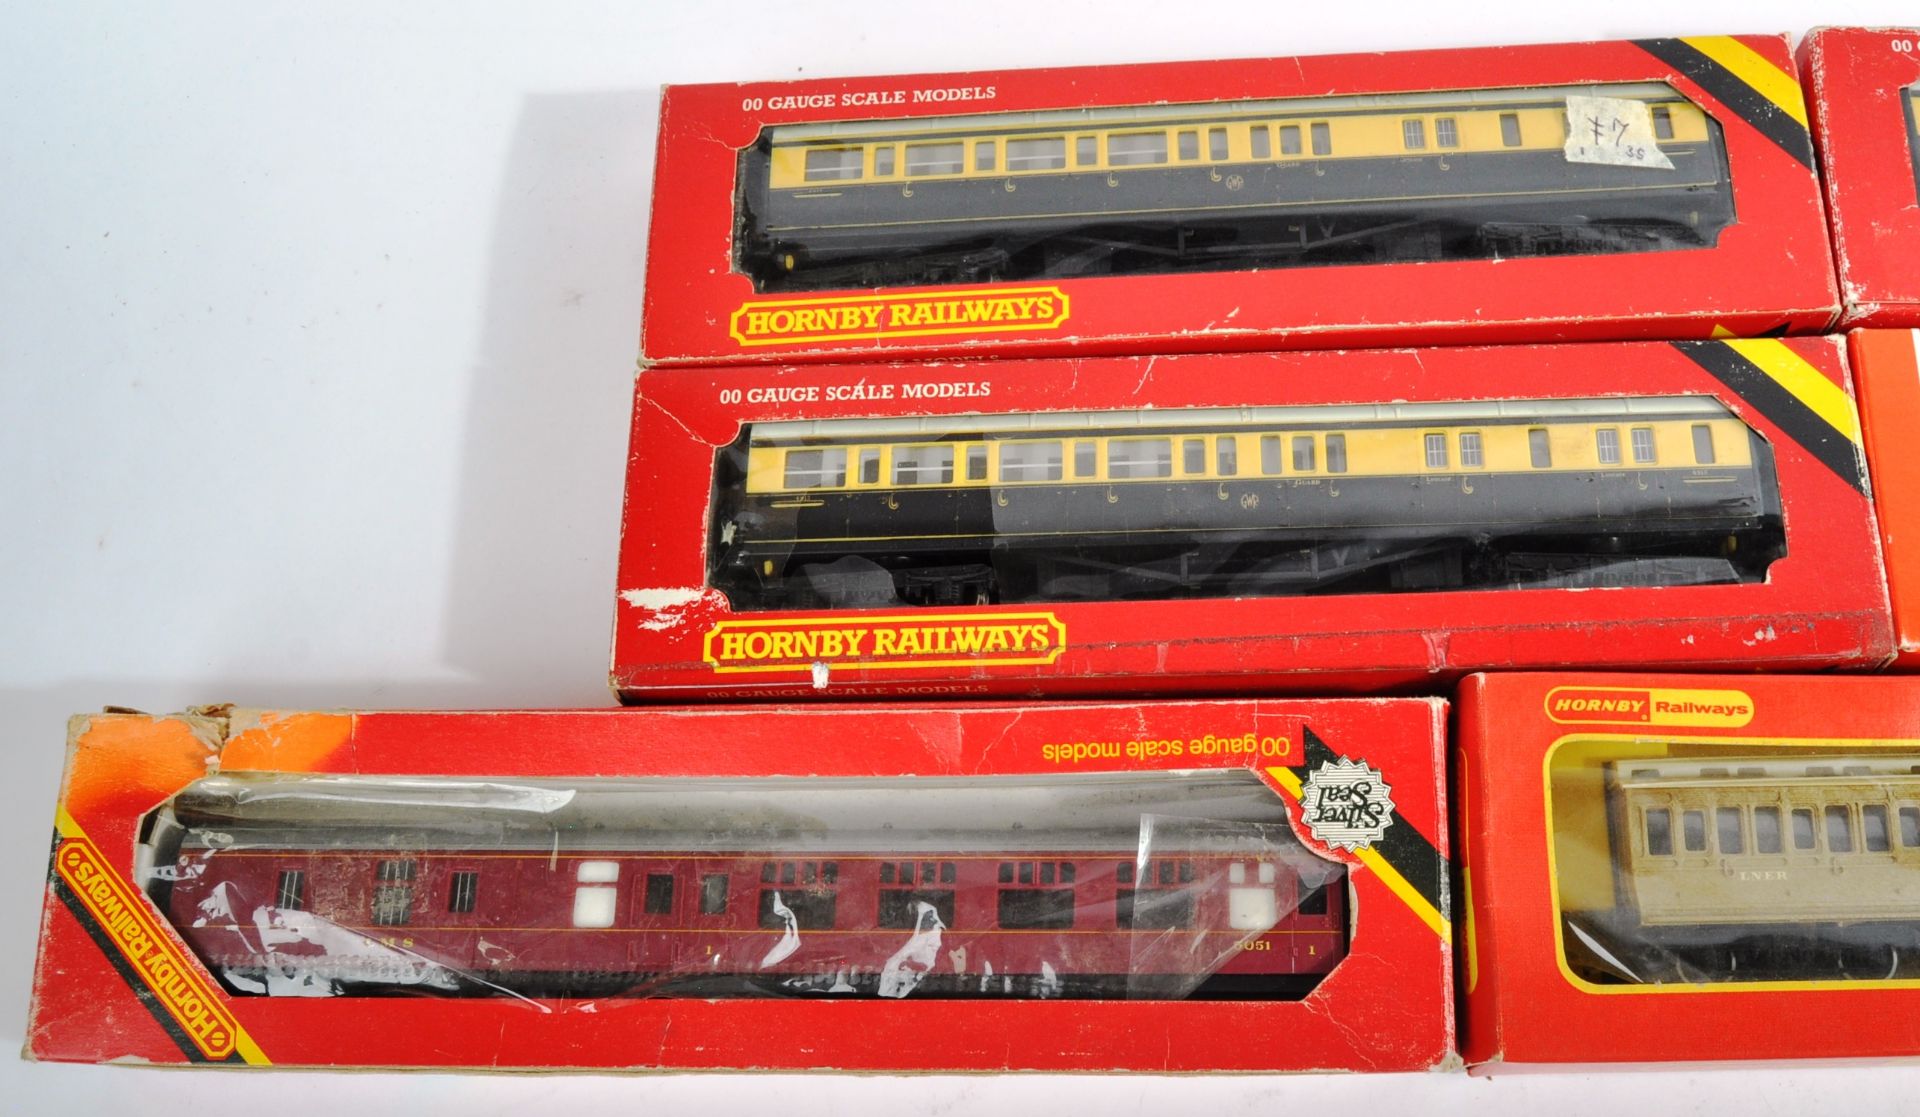 COLLECTION OF HORNBY 00 GAUGE MODEL RAILWAY CARRIAGES - Image 2 of 4